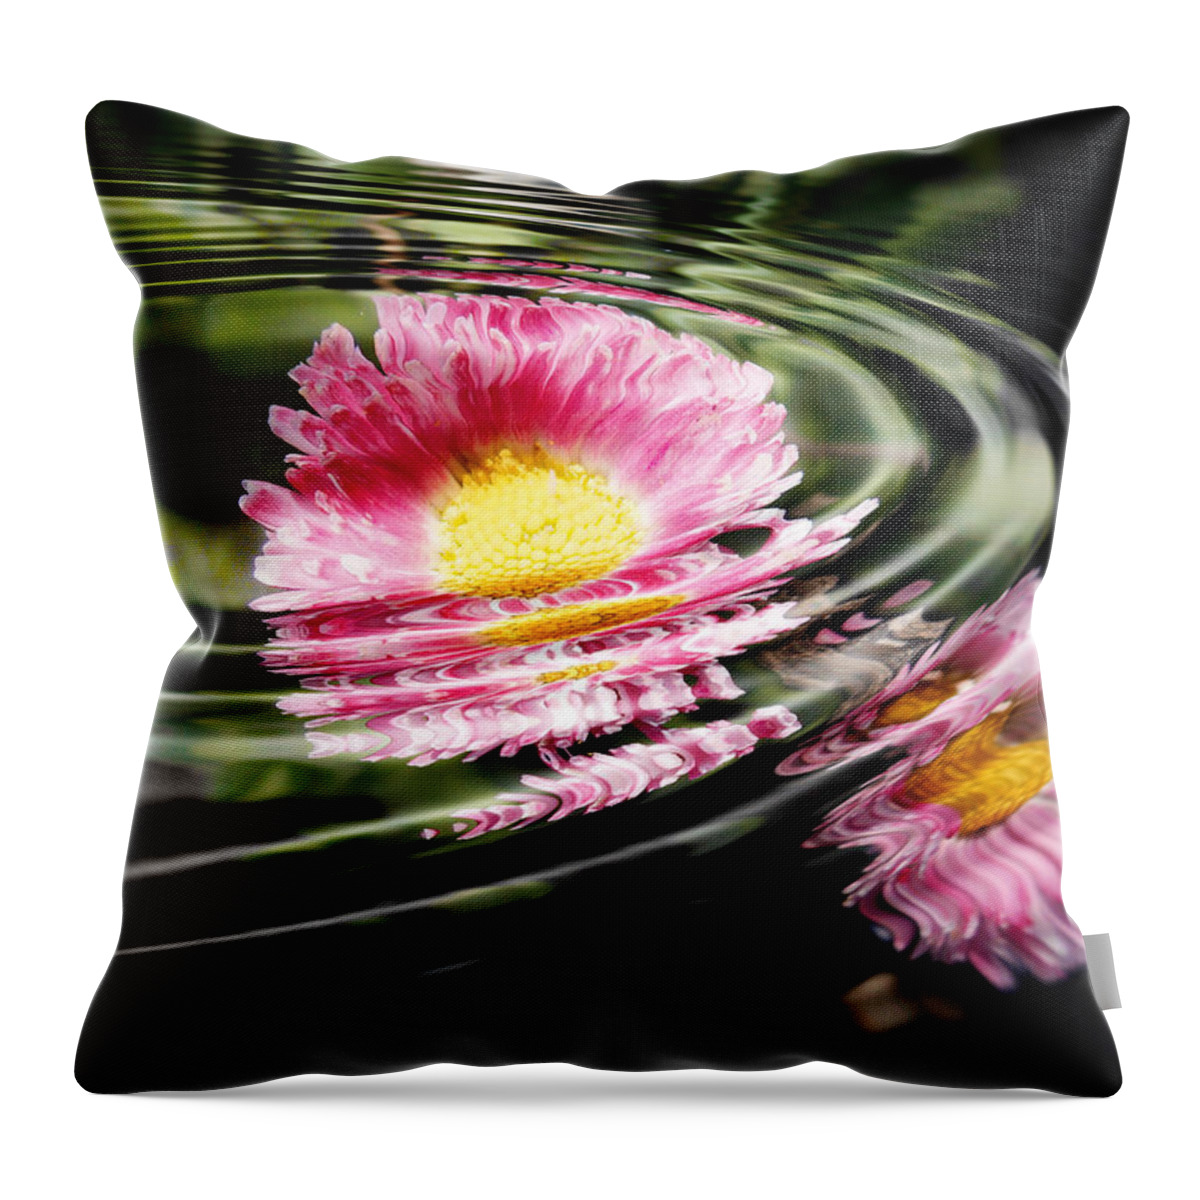 Petal Throw Pillow featuring the photograph Petal Ripple by Zinvolle Art